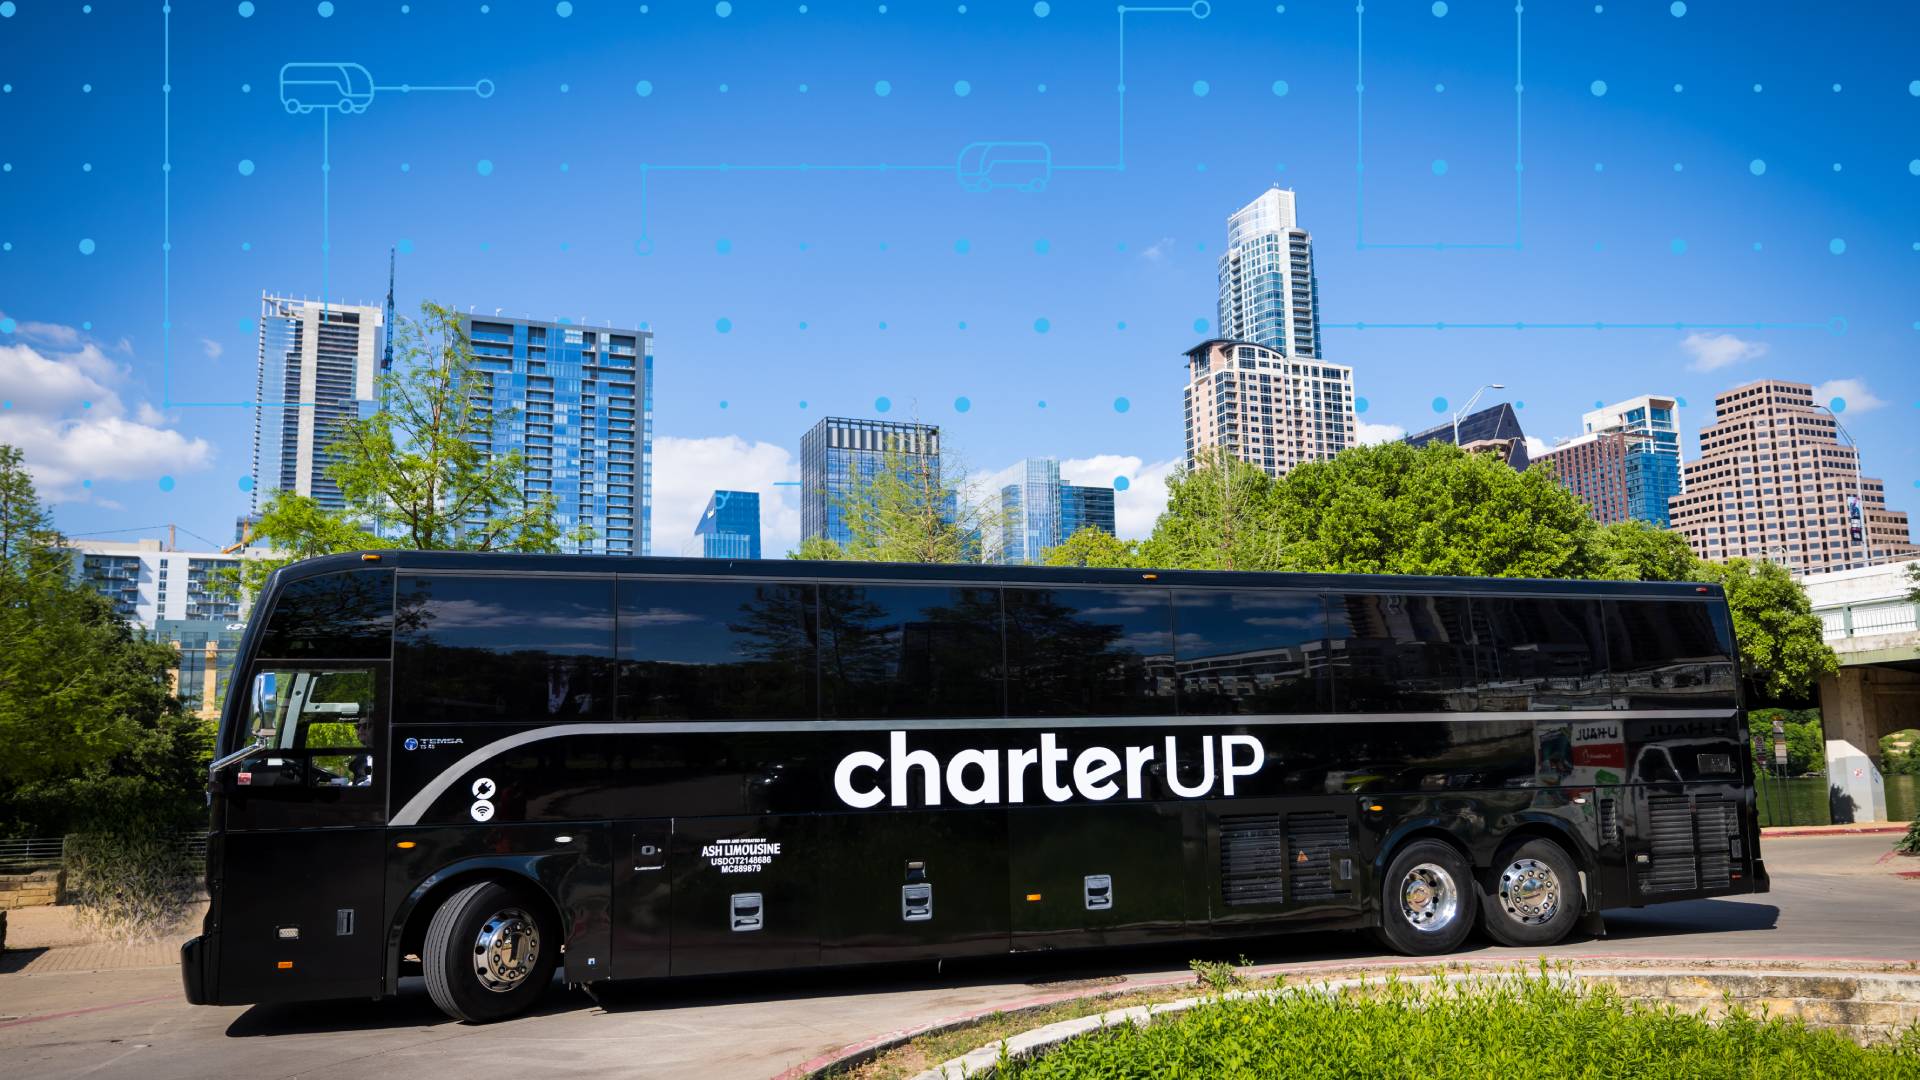 A CharterUP bus parks in front of the Austin skyline to announce the startup's new headquarters in the Innovation Corridor.